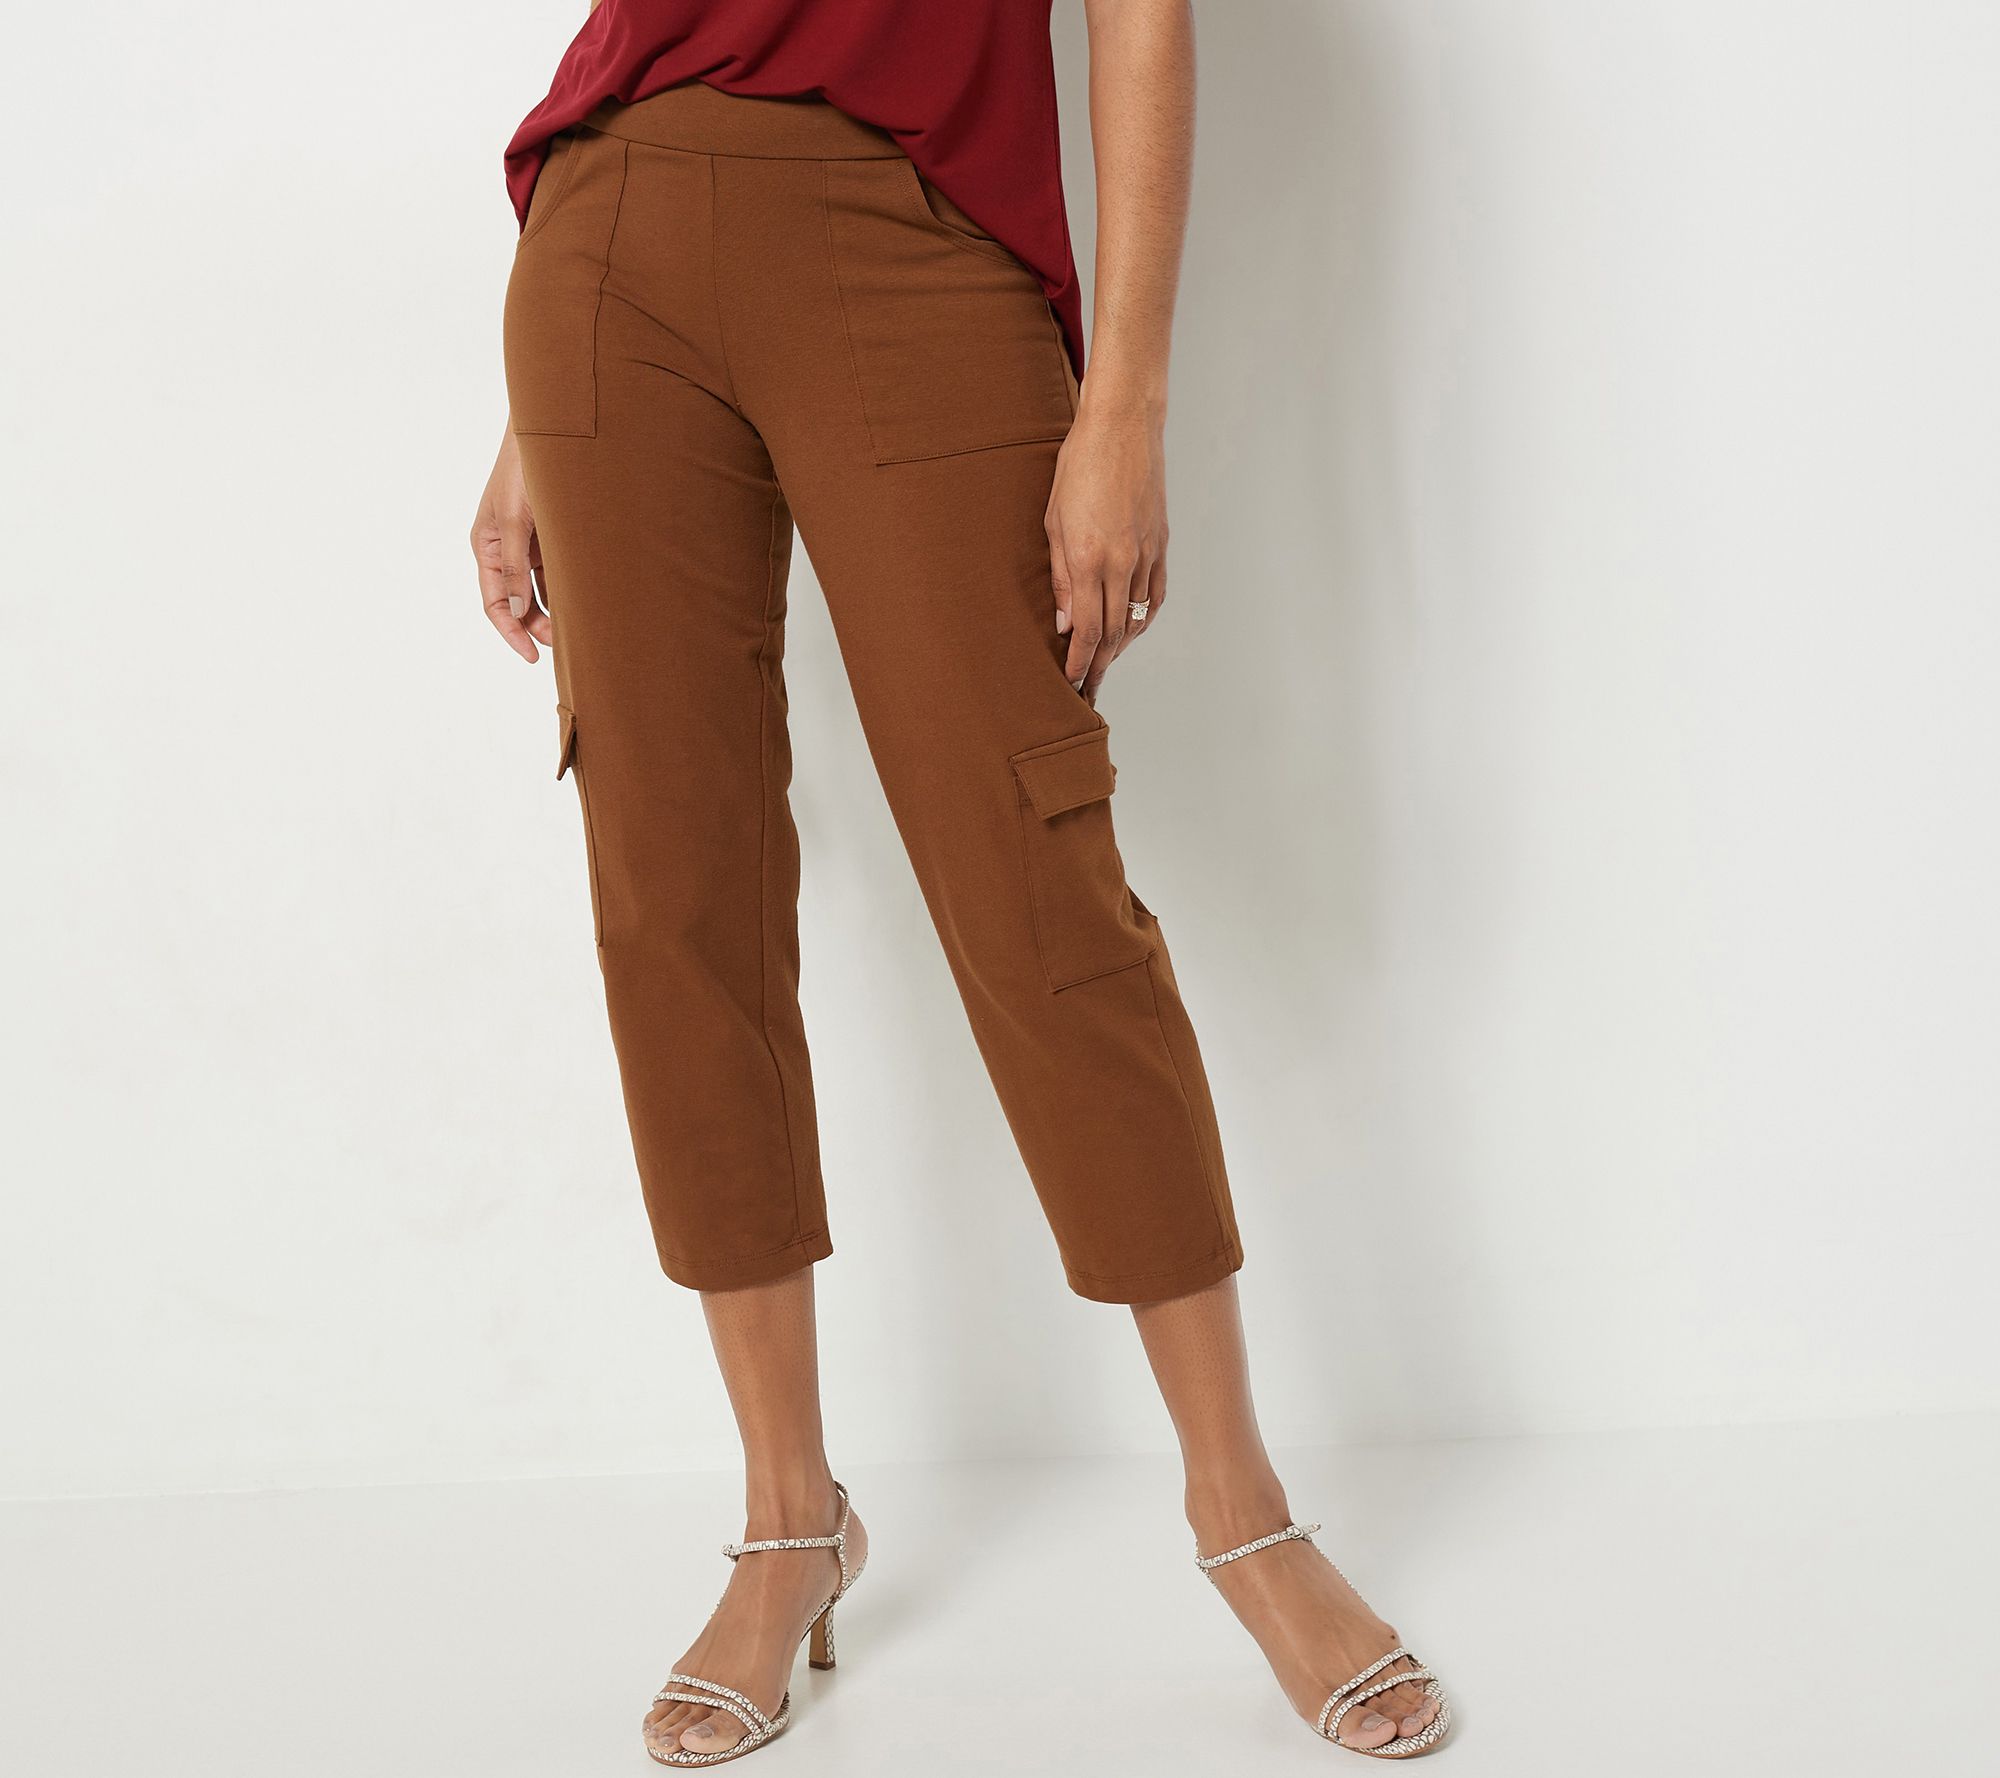 Women with Control Petite Tummy Control Crop Pants with Pockets